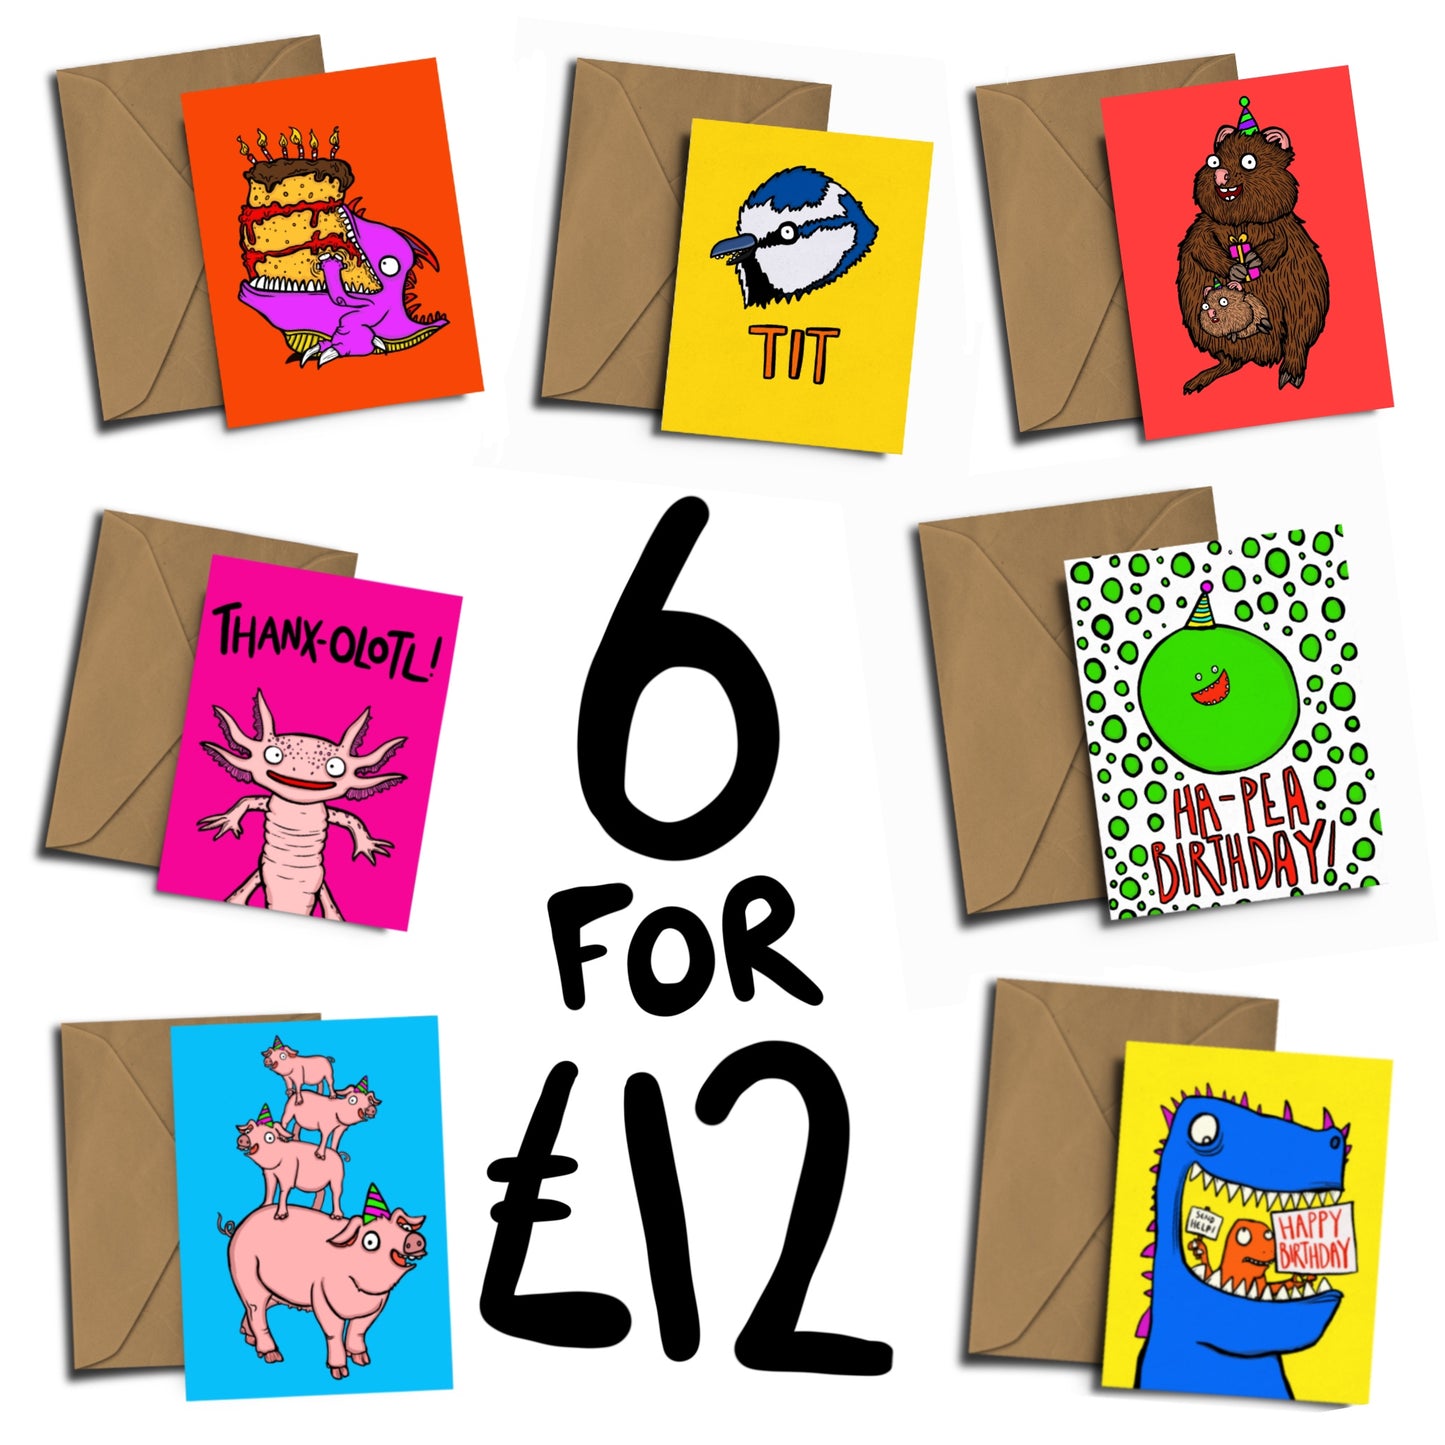 6 Cards for £12